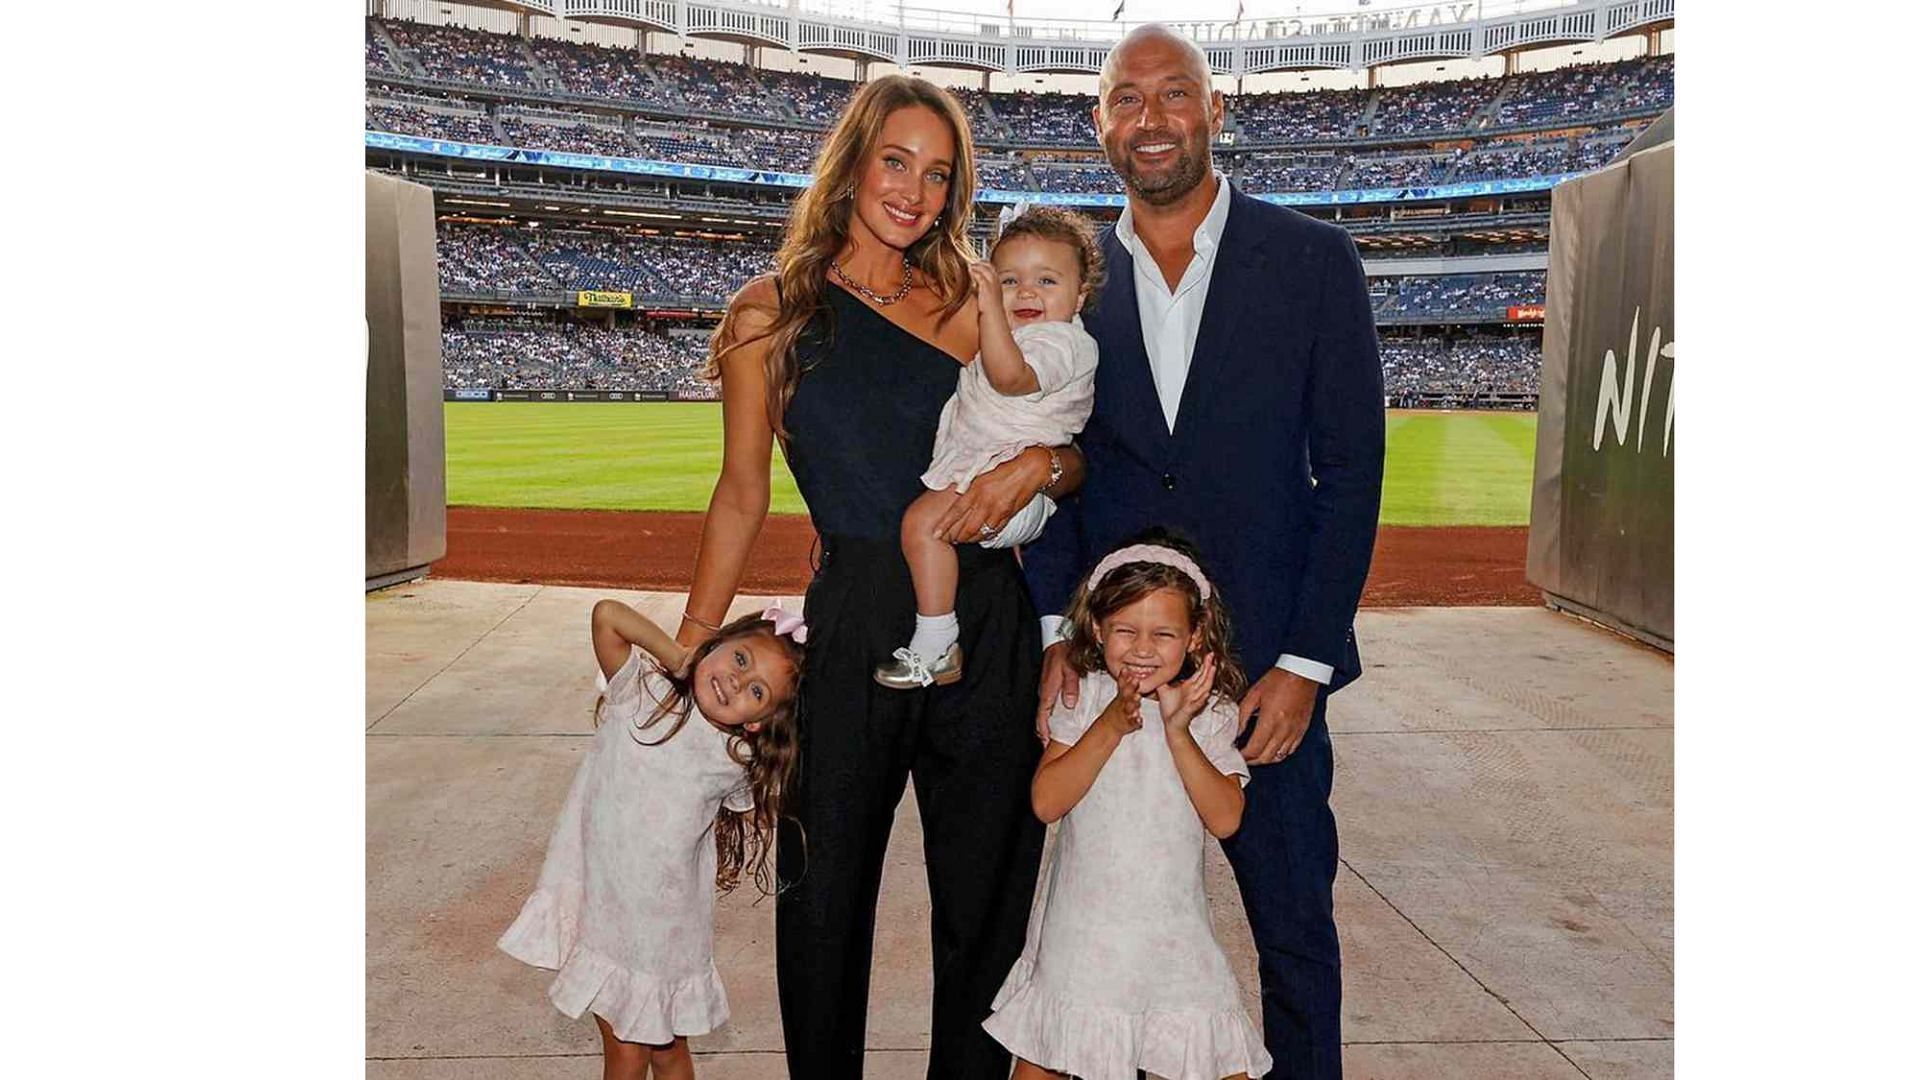 Derek Jeter and his wife, Hannah Jeter, with their daughters